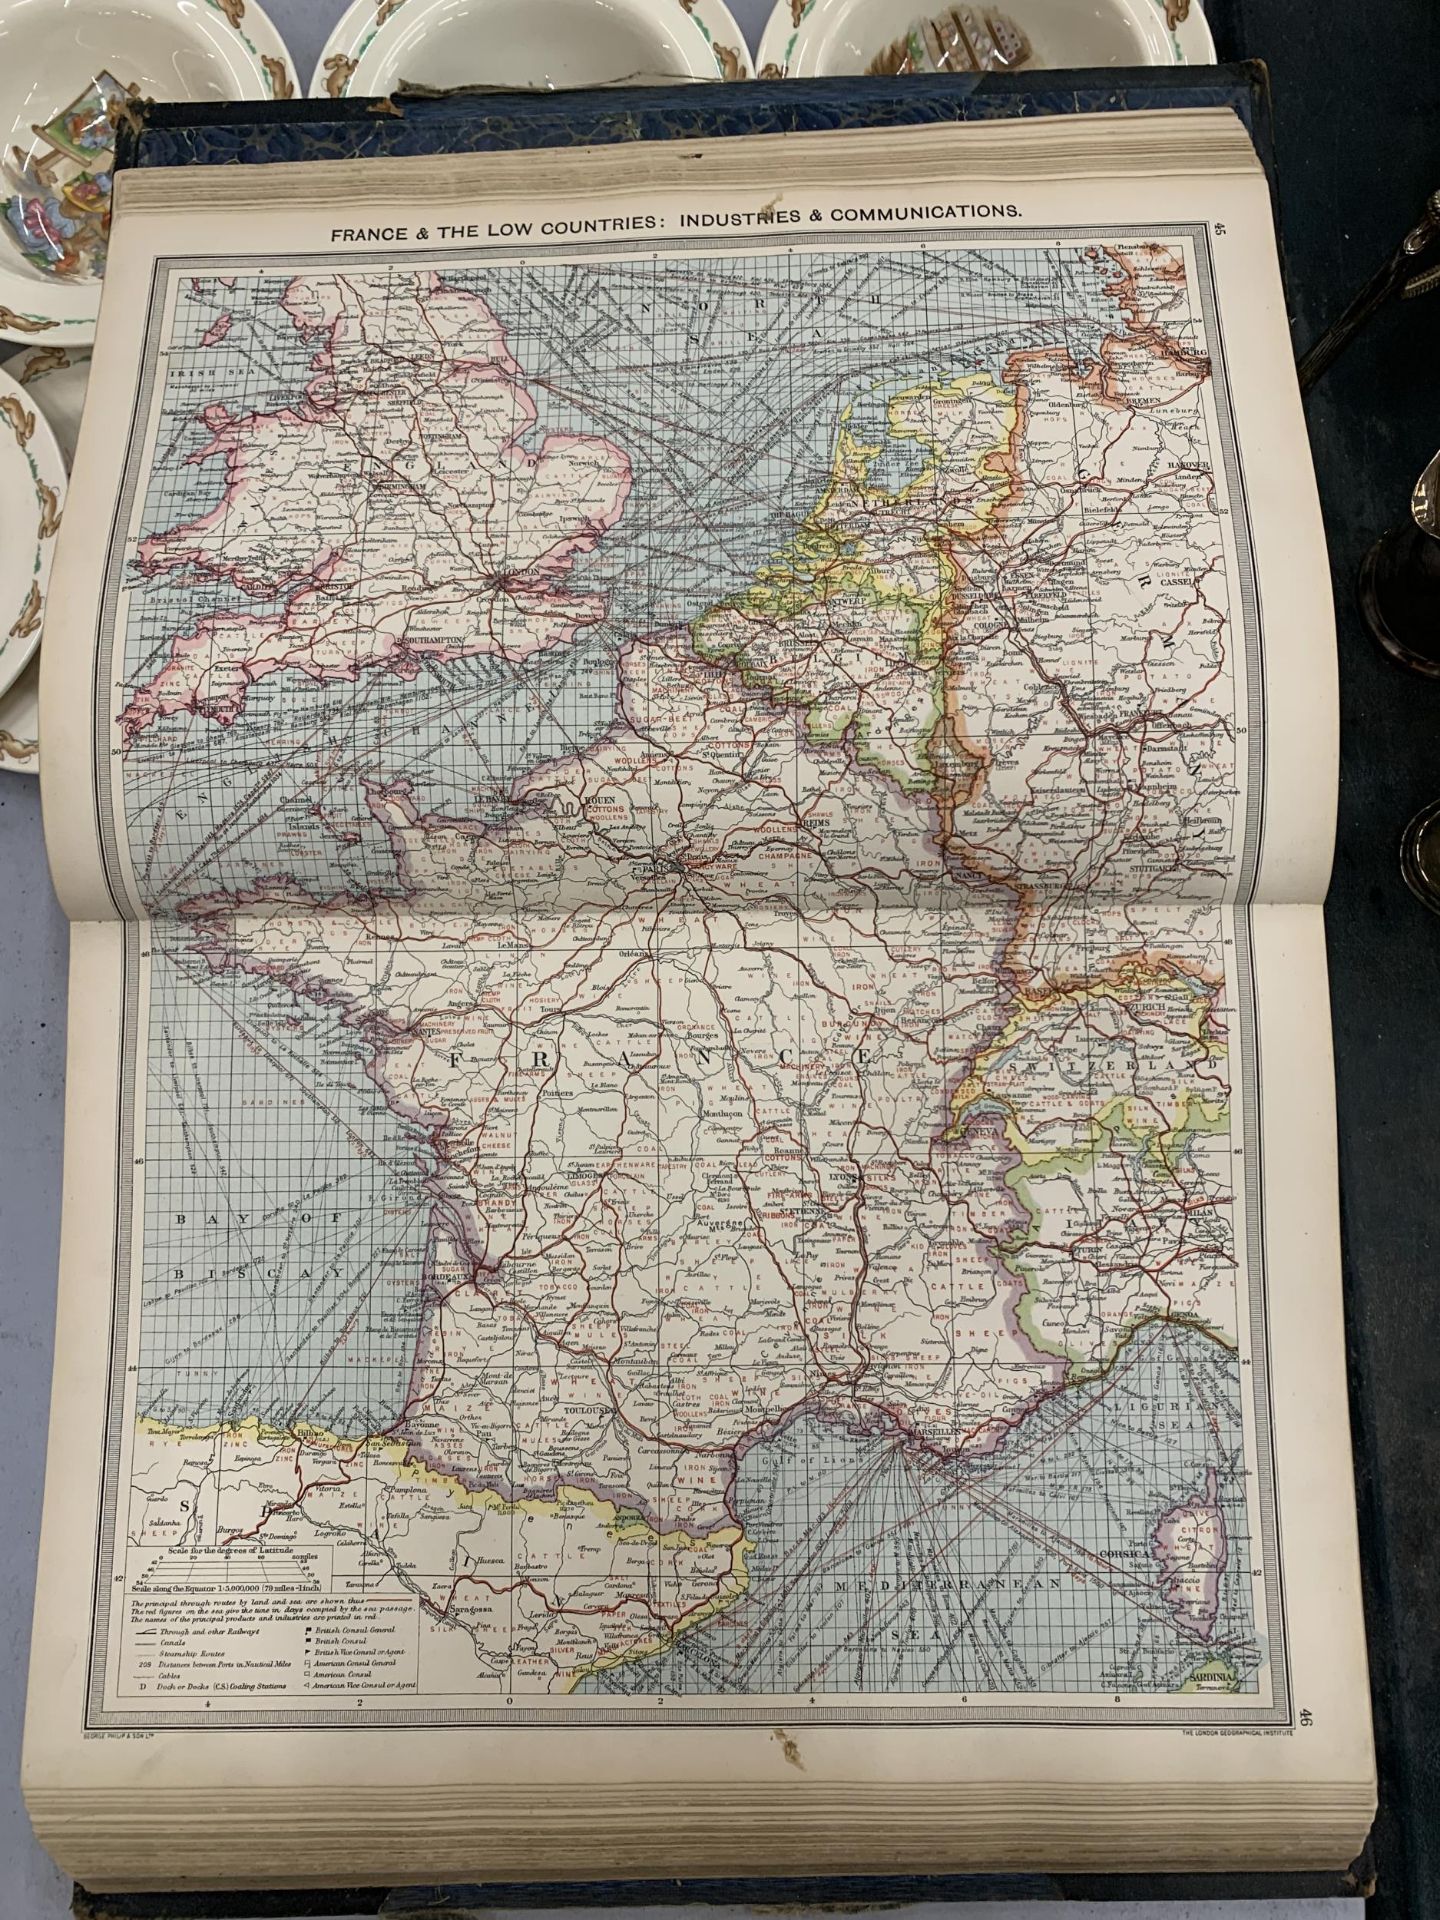 A VINTAGE MAPS OF THE WORLD BOOK - Image 3 of 9